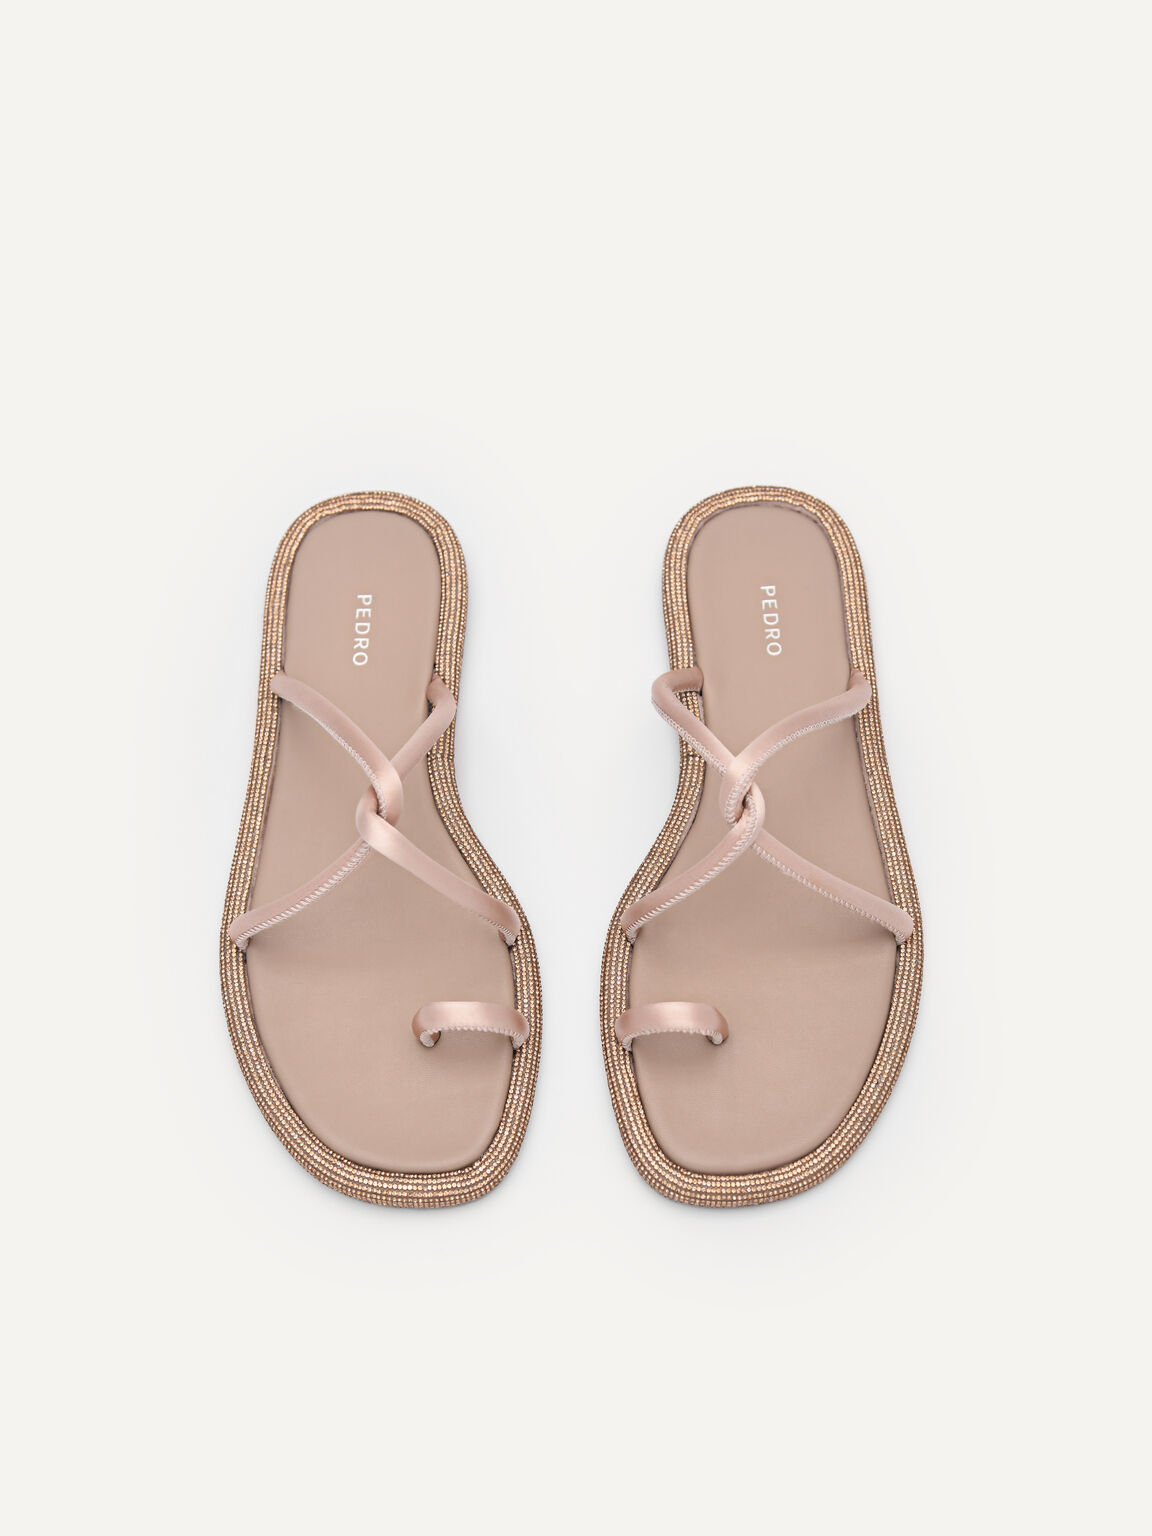 Rina Strappy Sandals, Nude